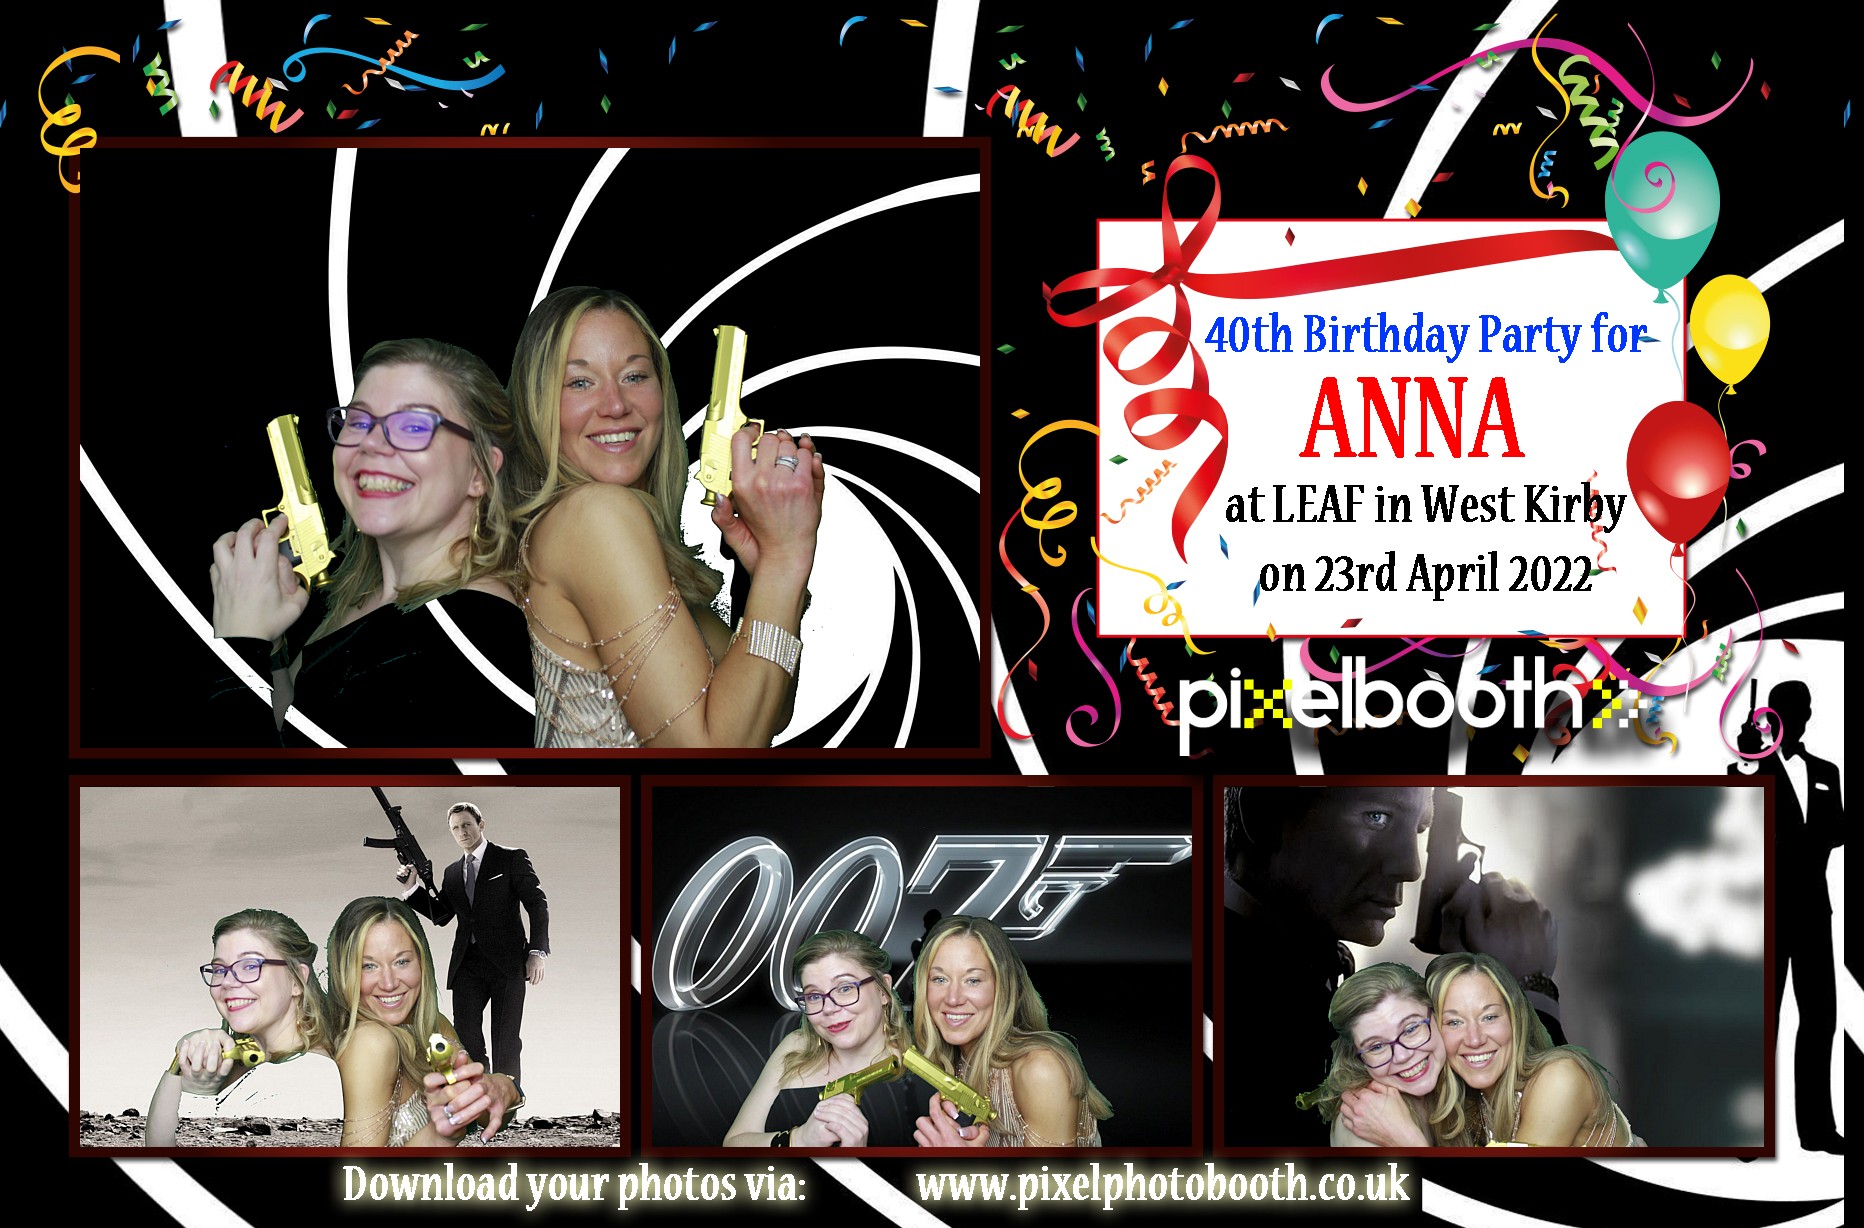 23rd April 2022: 40th Birthday for Anna